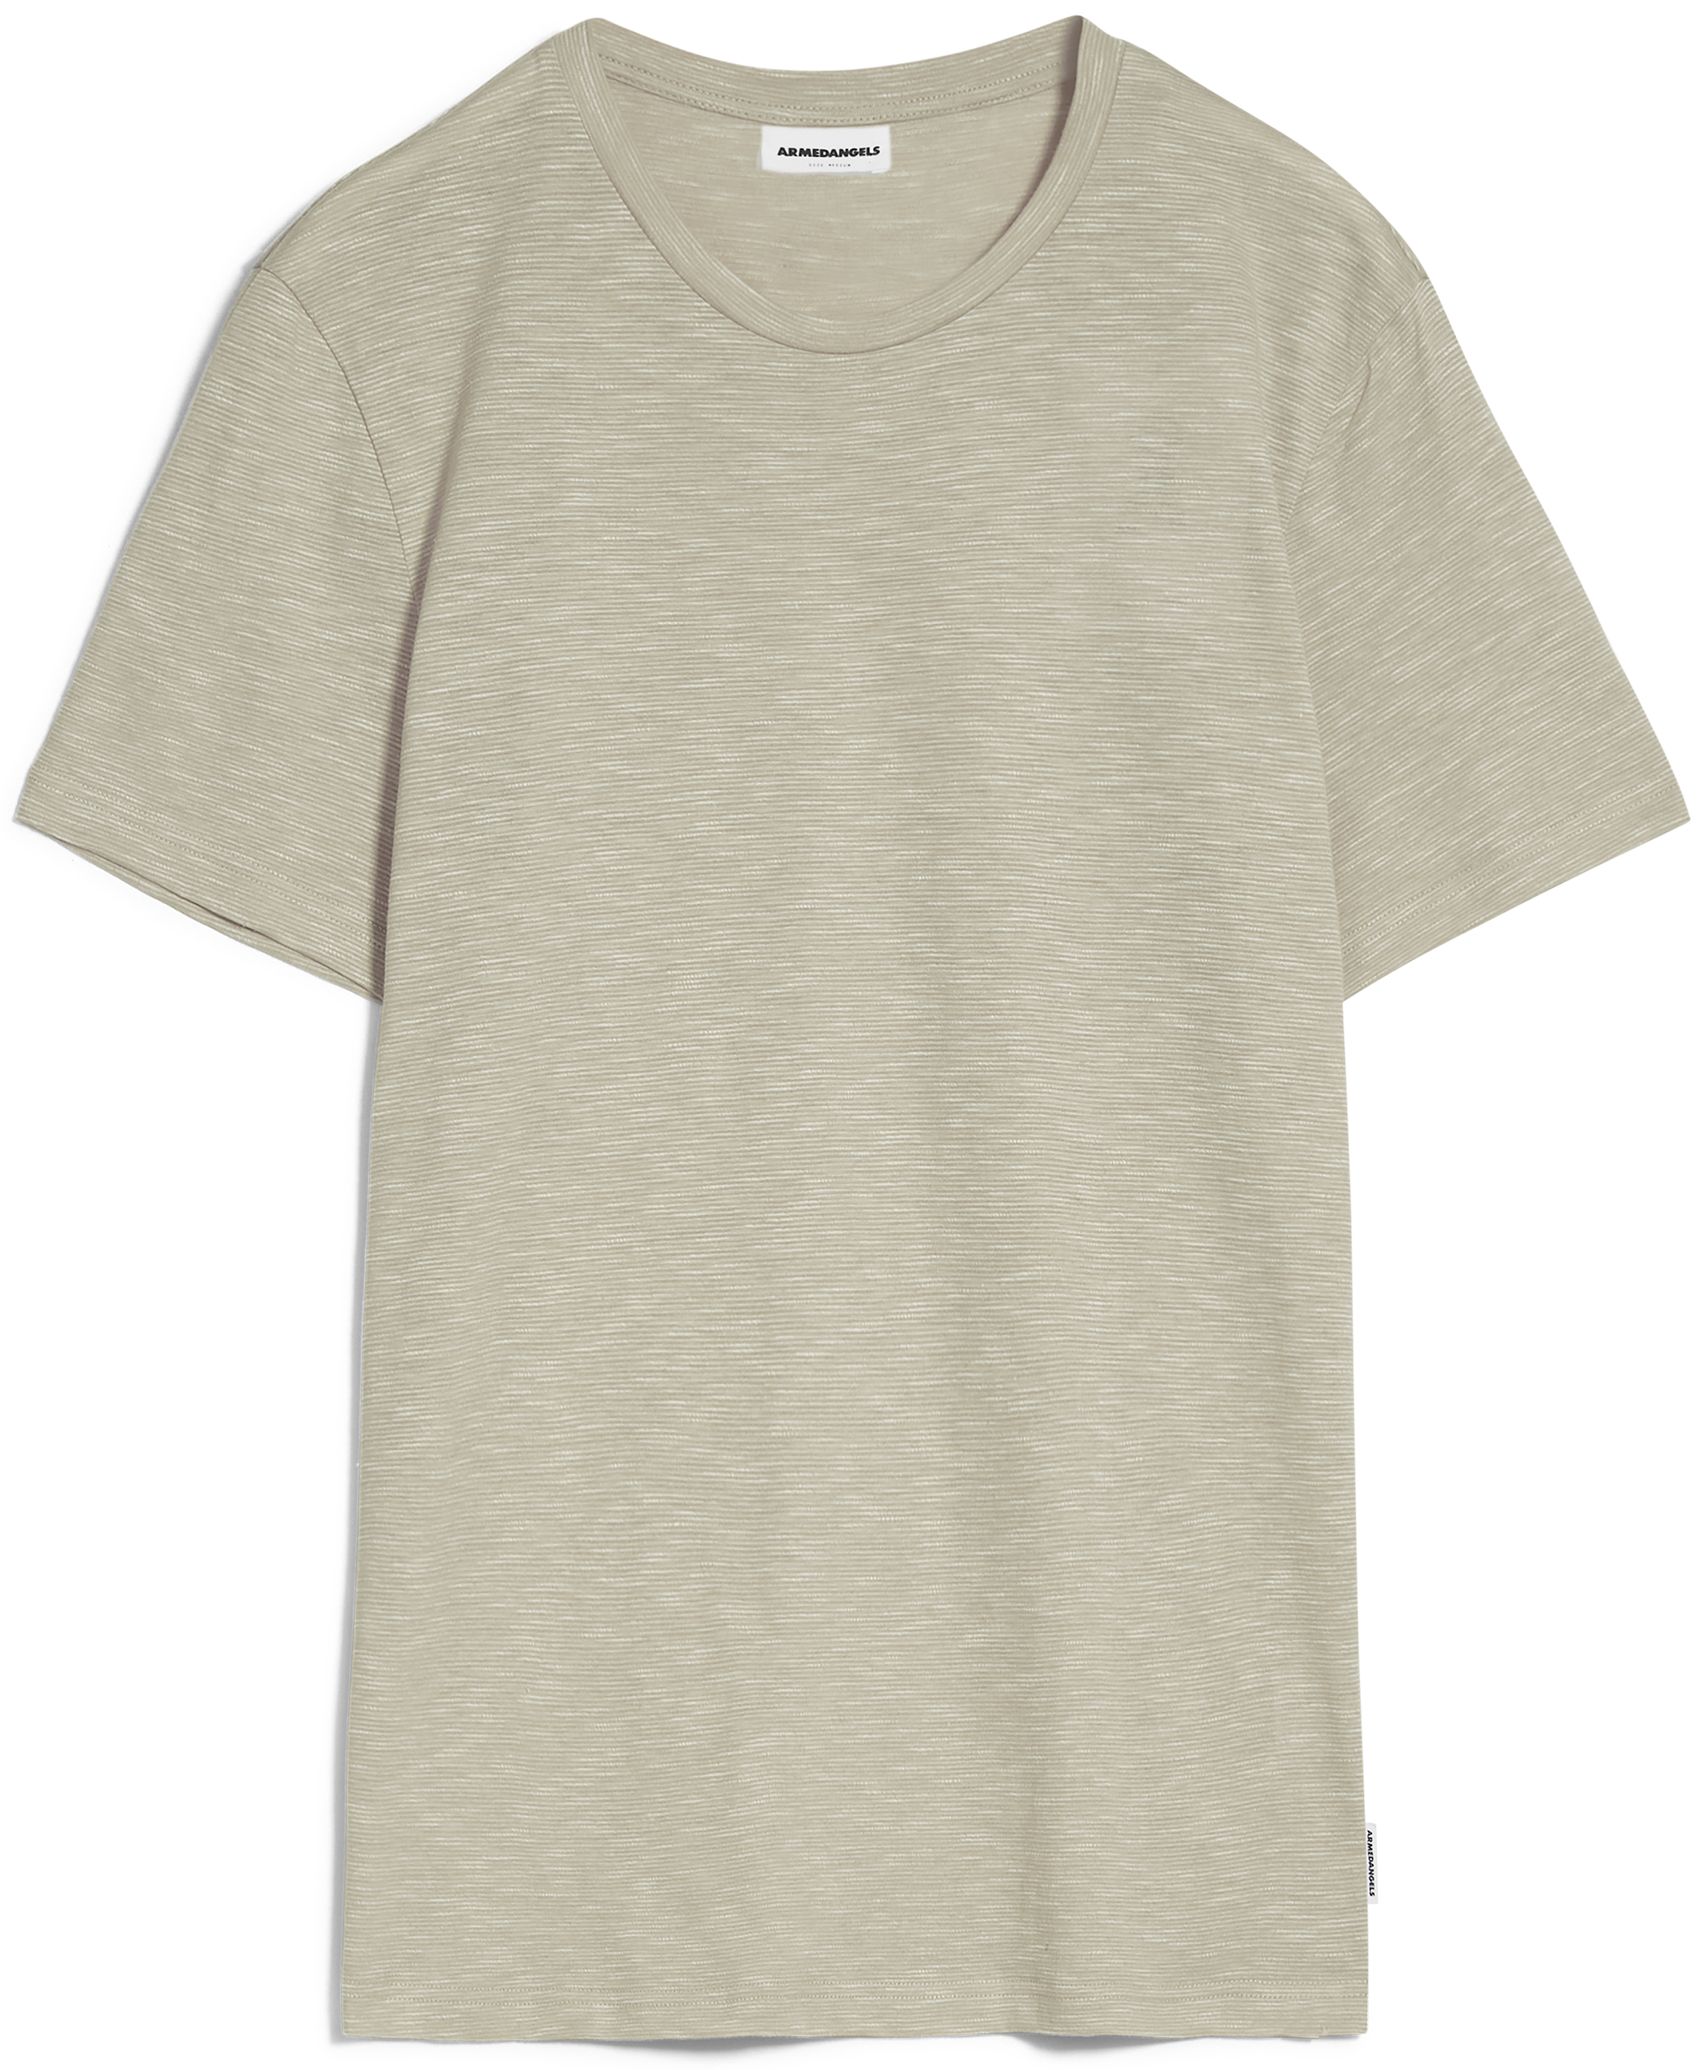 T-Shirt JAAMES STRUCTURE sand stone/light sand stone